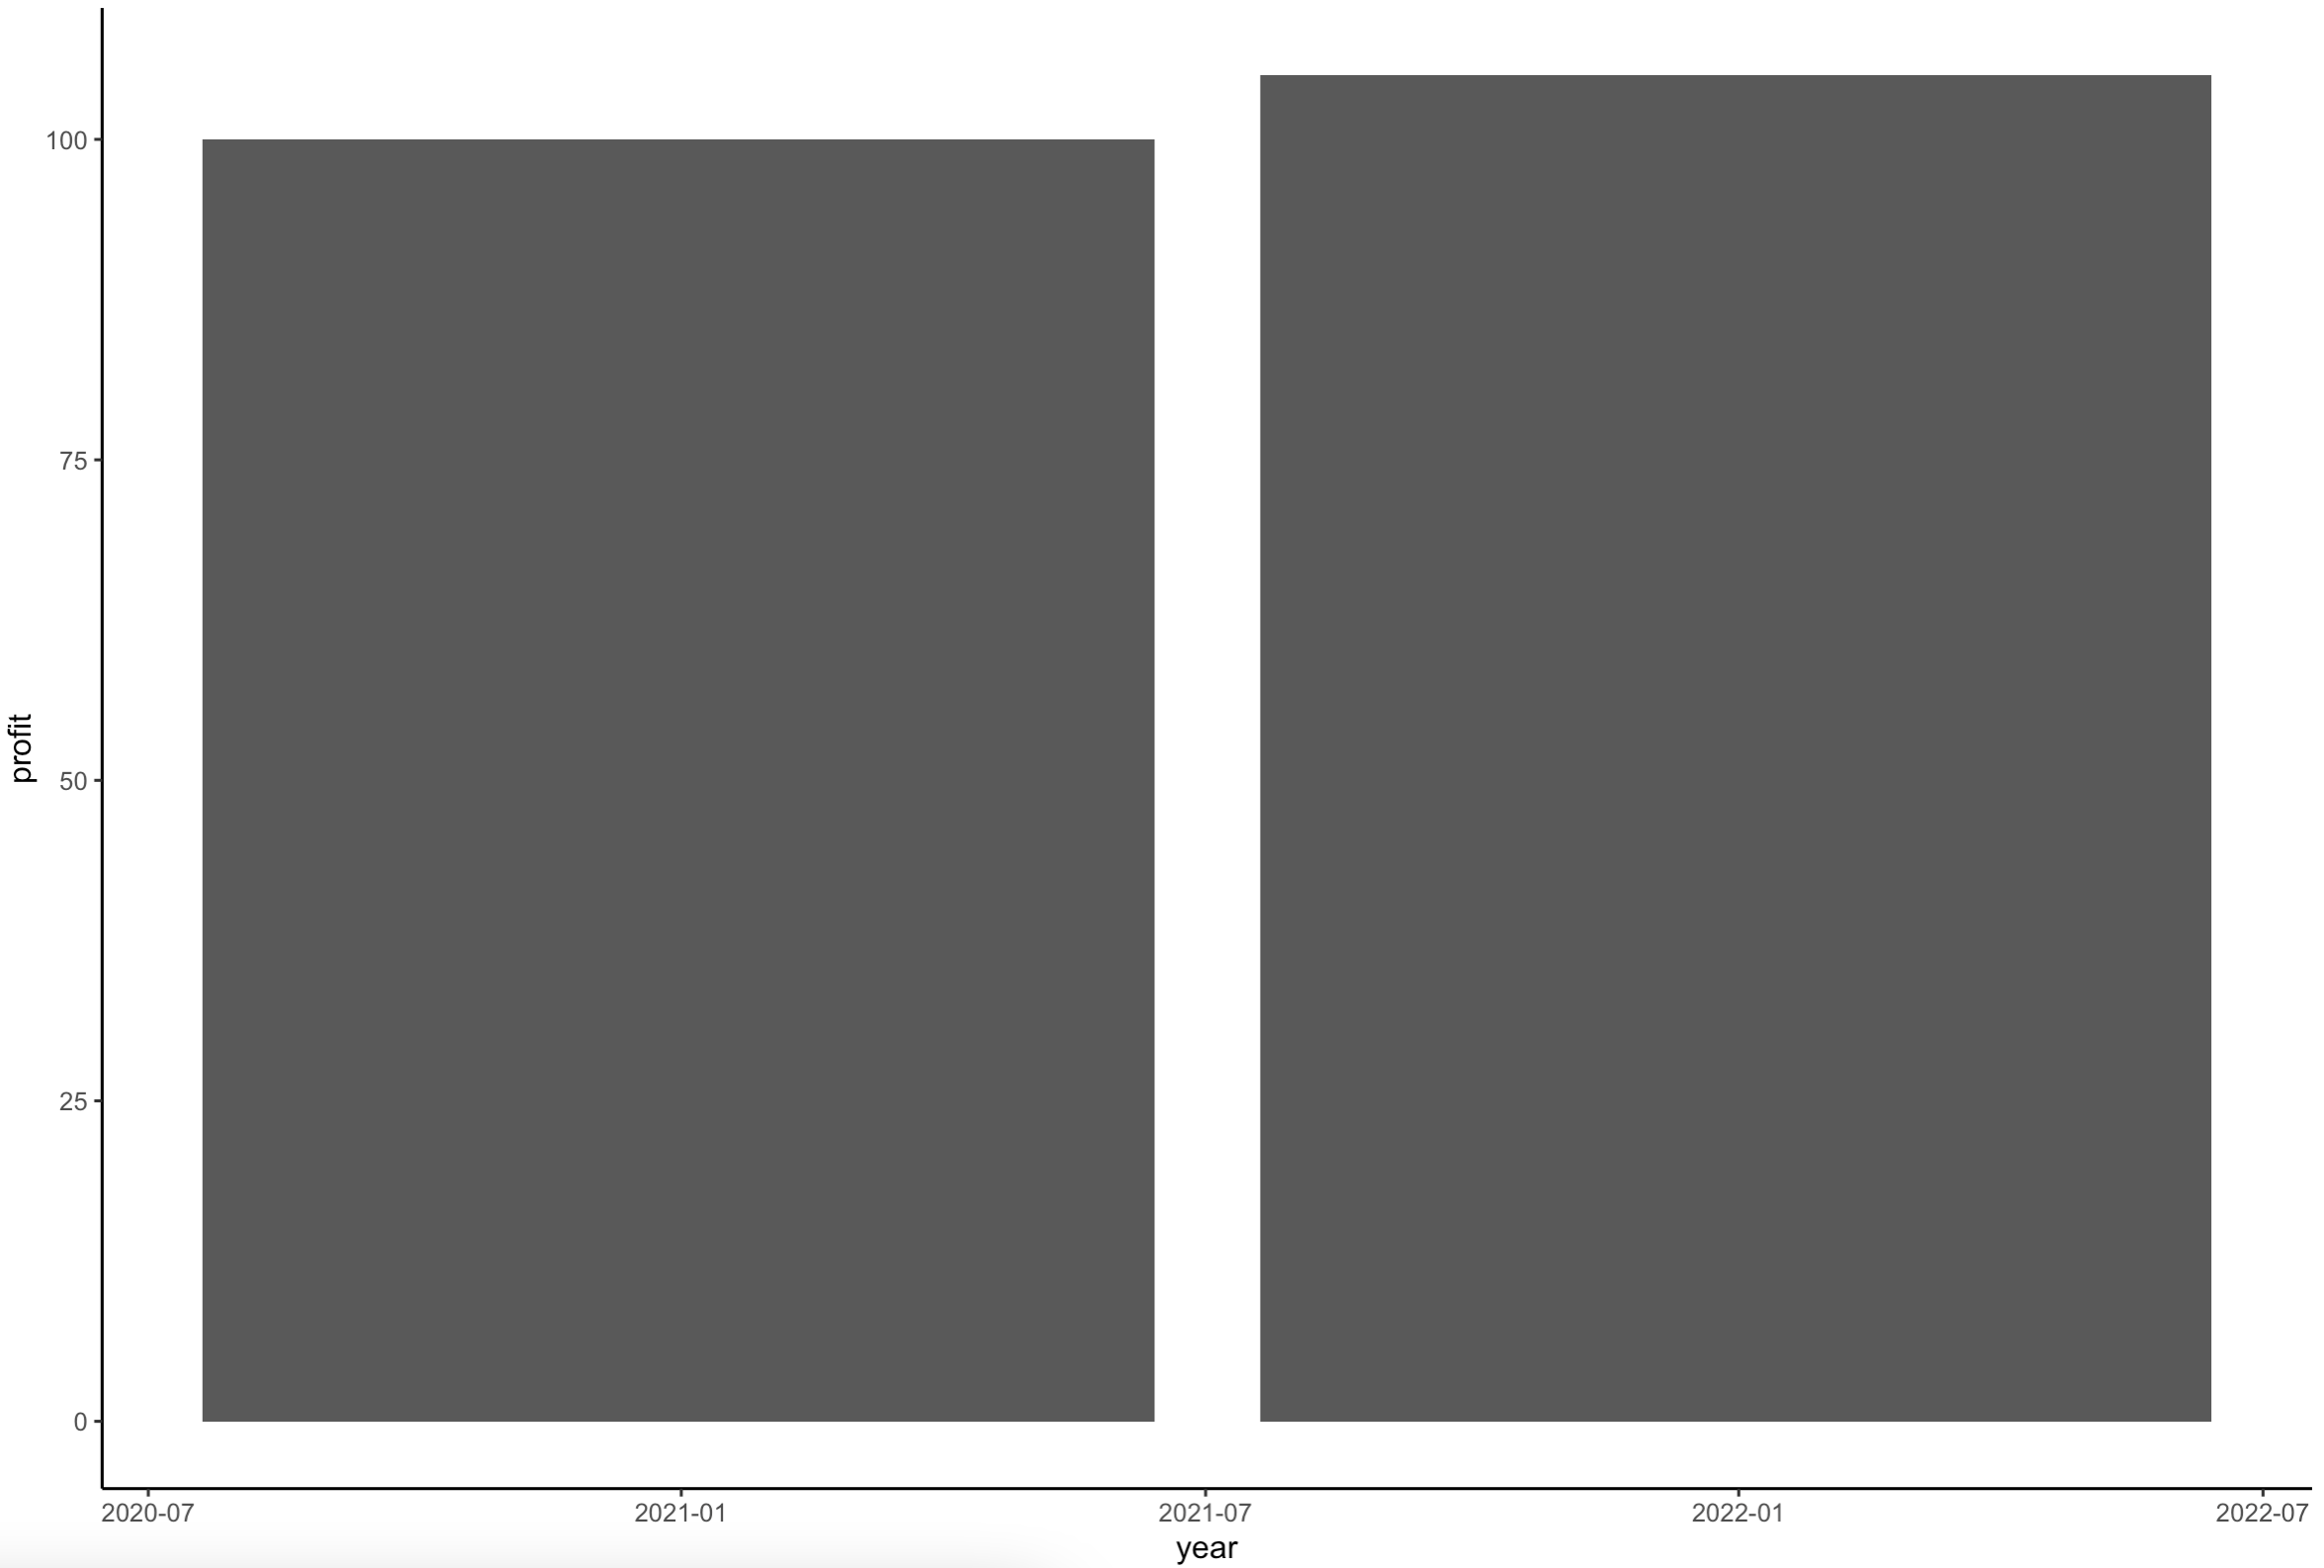 Image 2 - Bar chart with normally formatted Y-axis